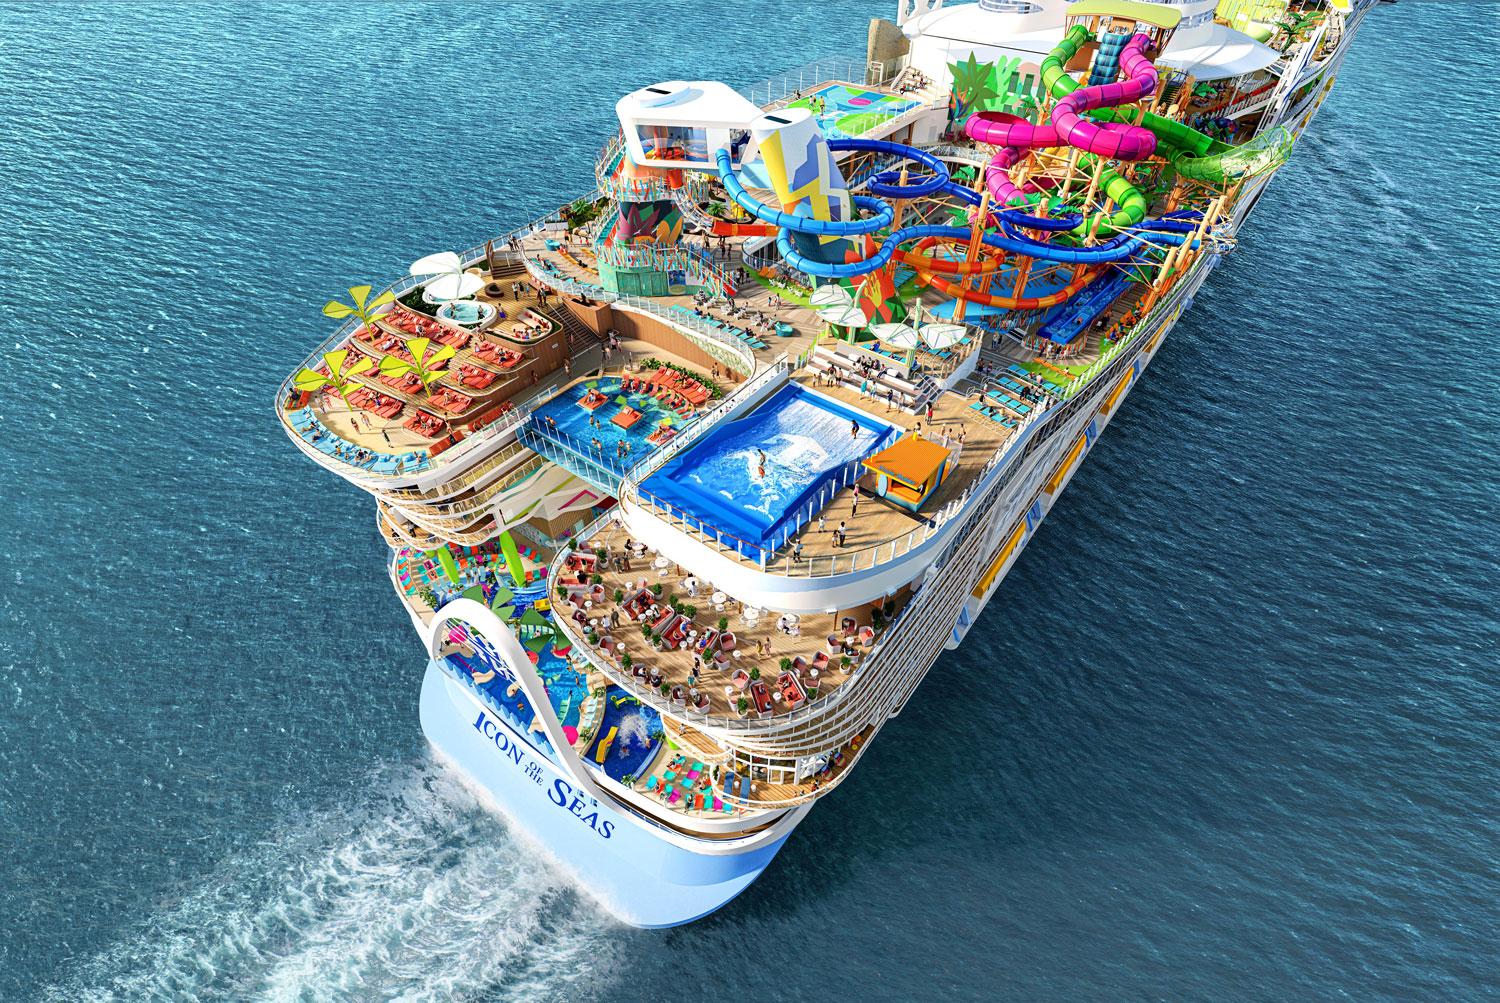 Icon of the Seas has the largest waterpark at Sea – 7 pools, 9 whirlpools & waterslides